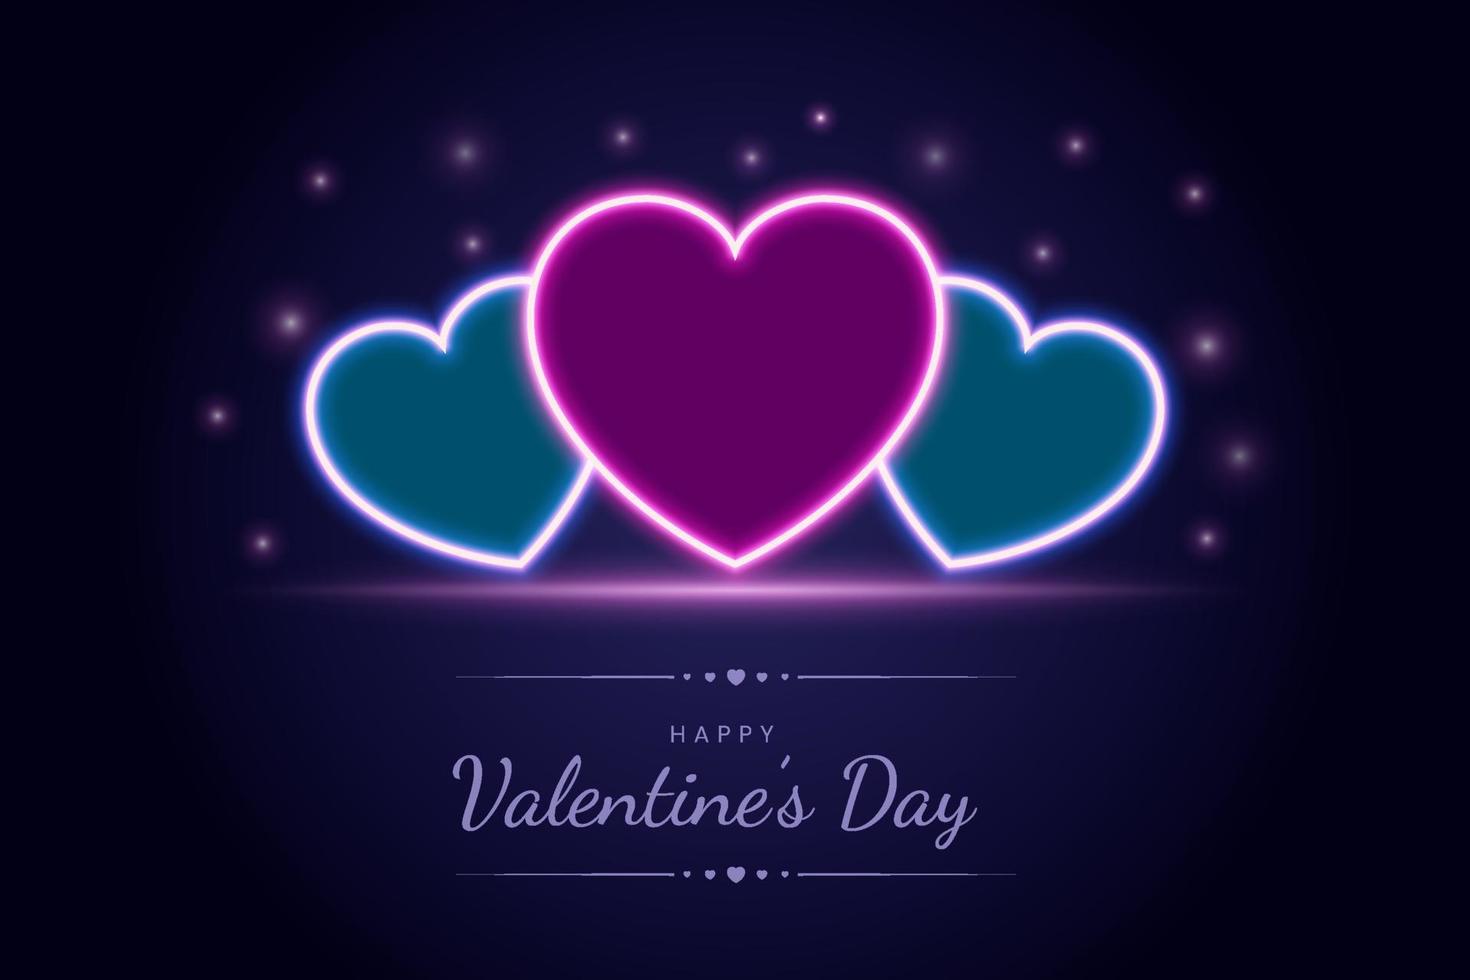 Valentines day background with neon love heart lamp. Valentine concept design. Light heart for holiday cards, banners, invitations. Vector art illustration.